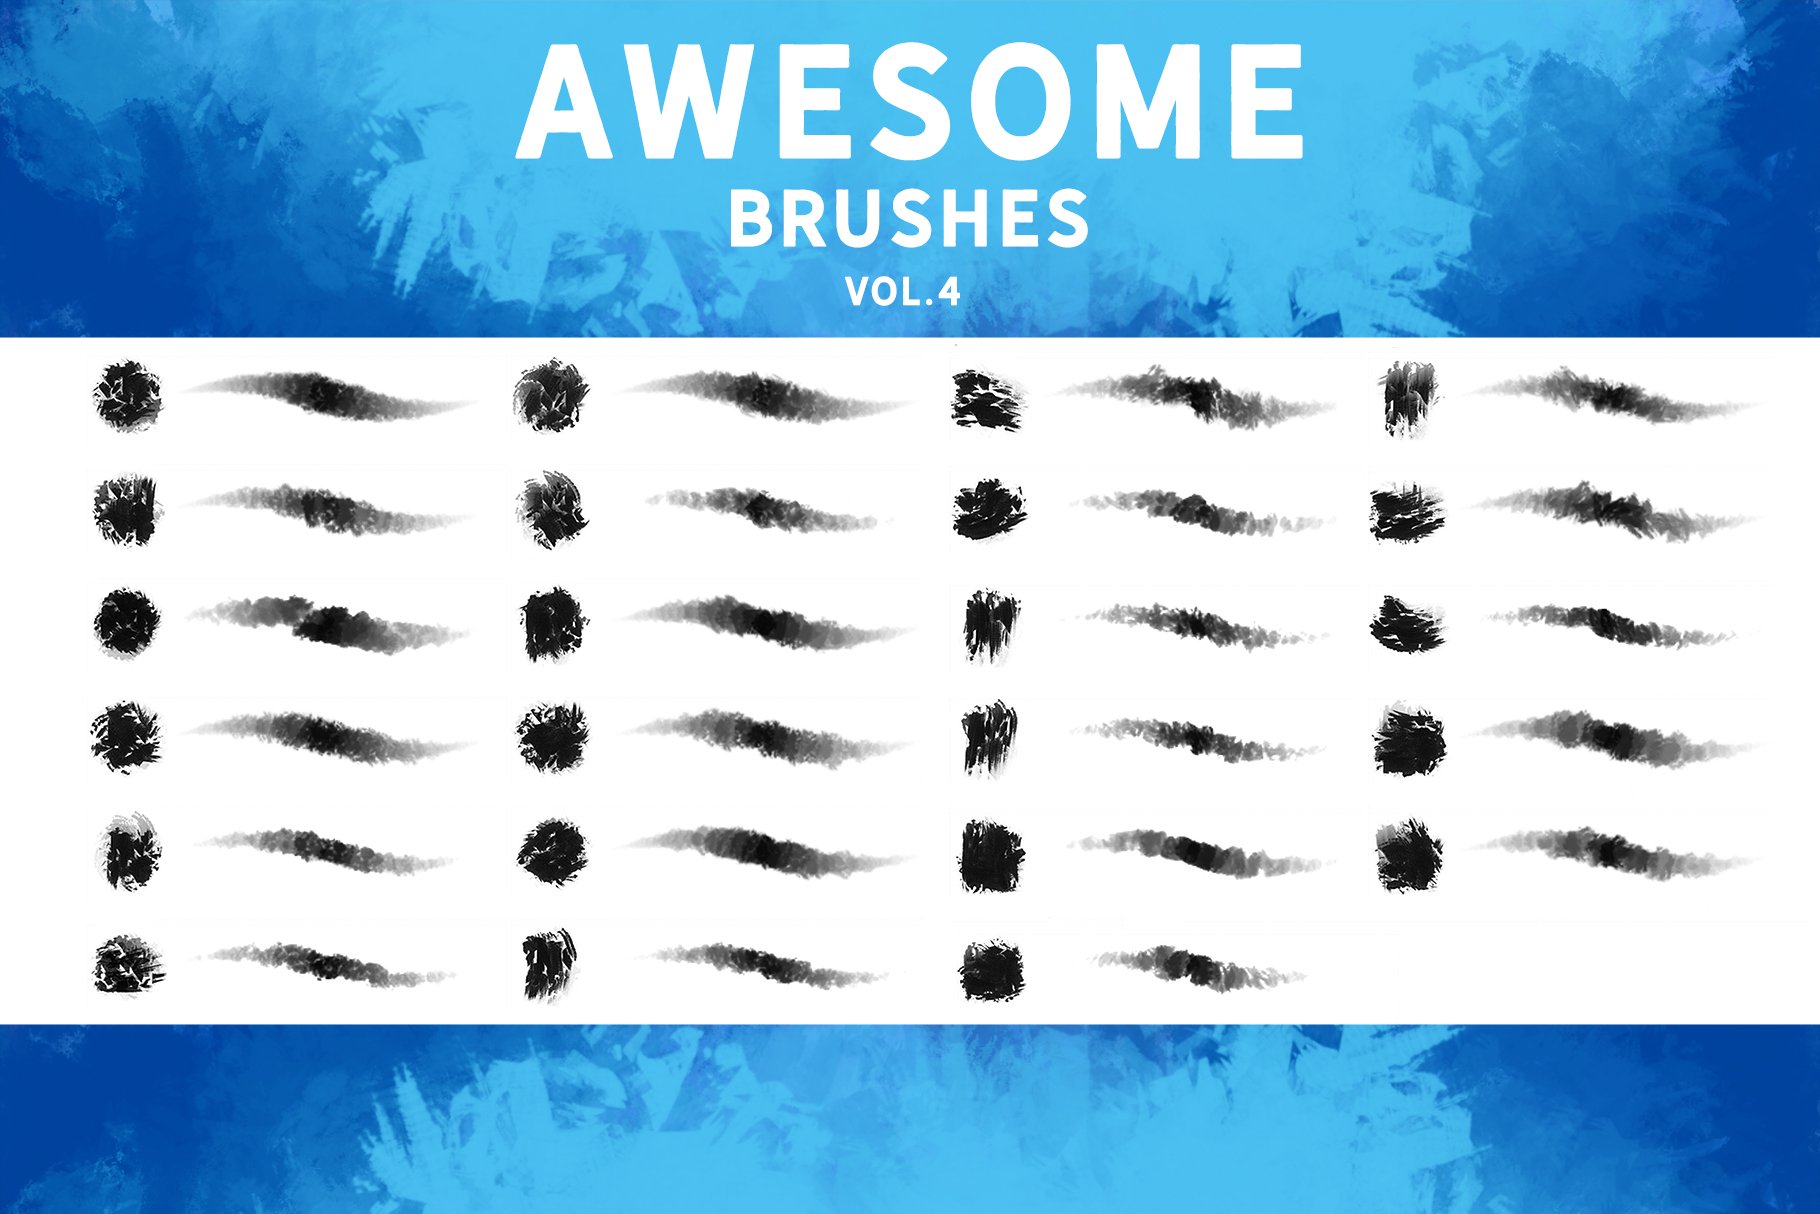 Awesome Brushes Vol 4cover image.